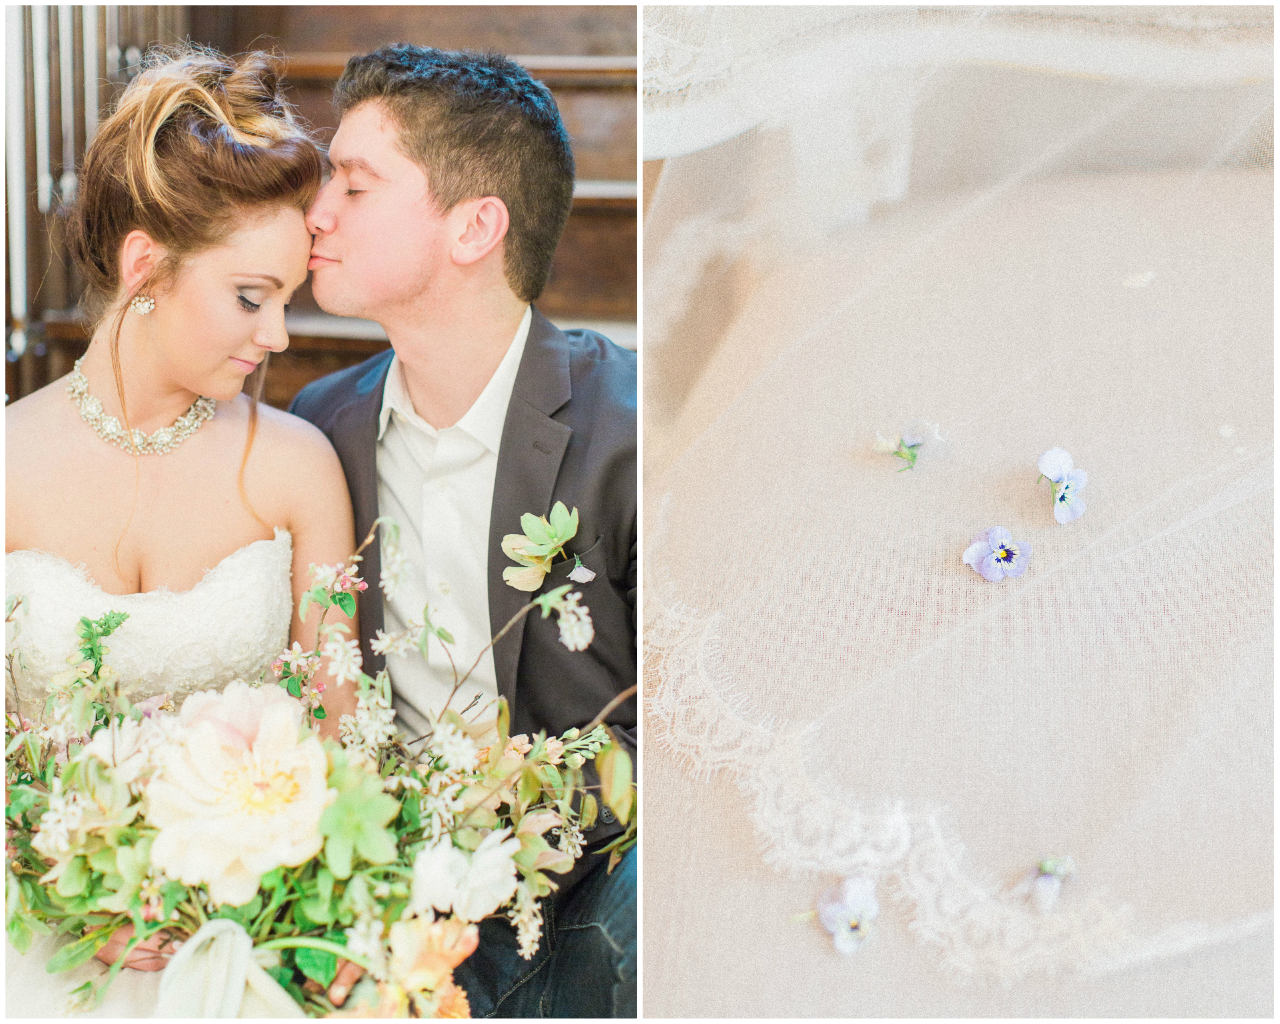 Spring Sweet Bridal | The Day's Design | Samantha James Photography